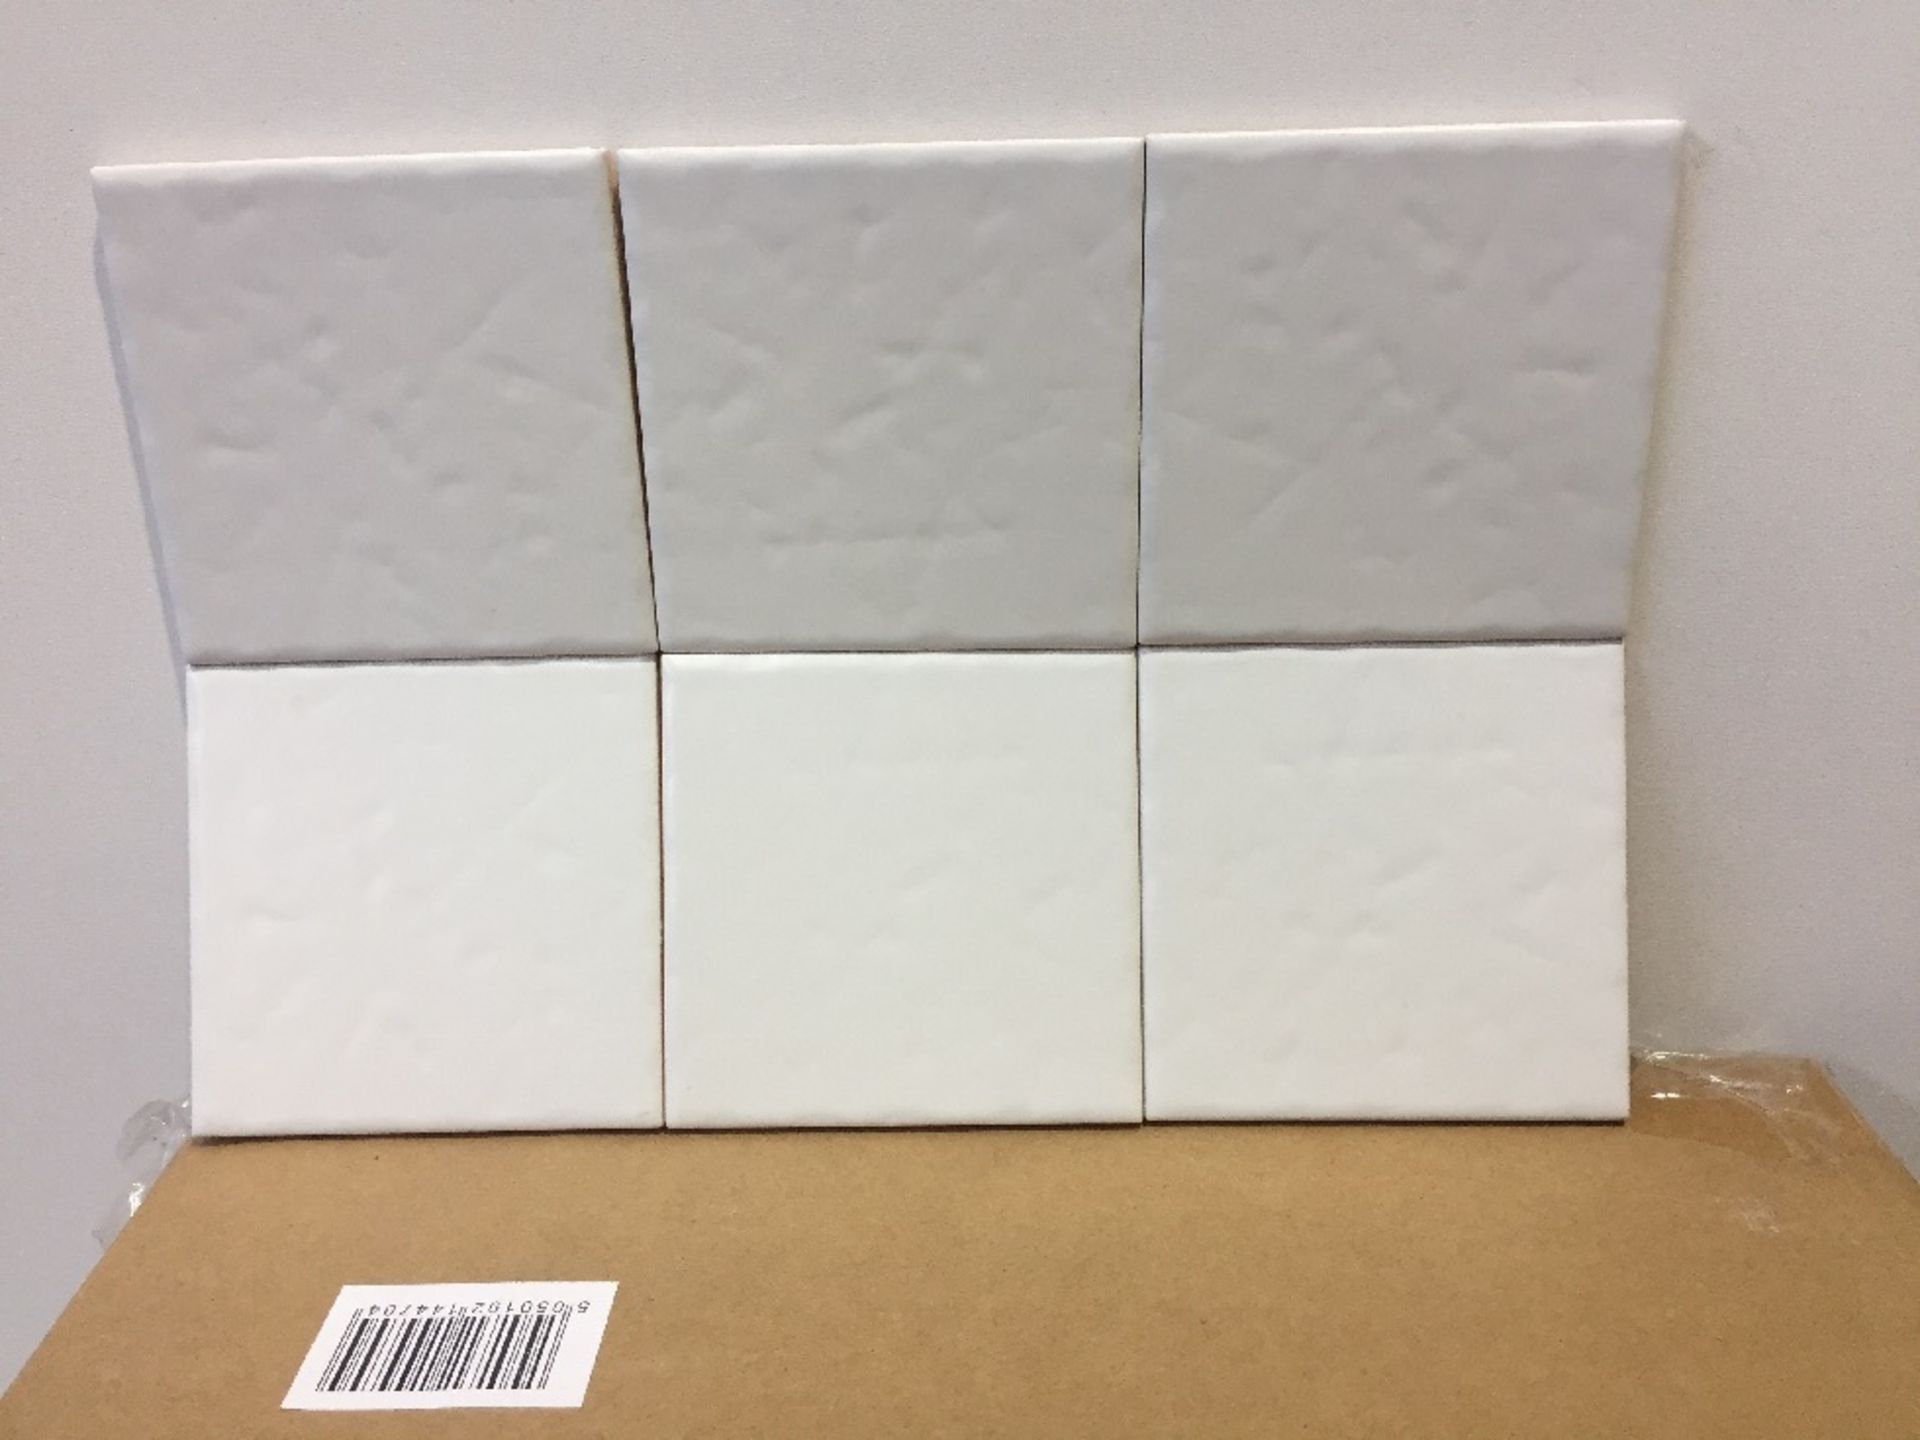 4 BRAND NEW BOXES OF JOHNSONS BATHROOM TILES IN CO